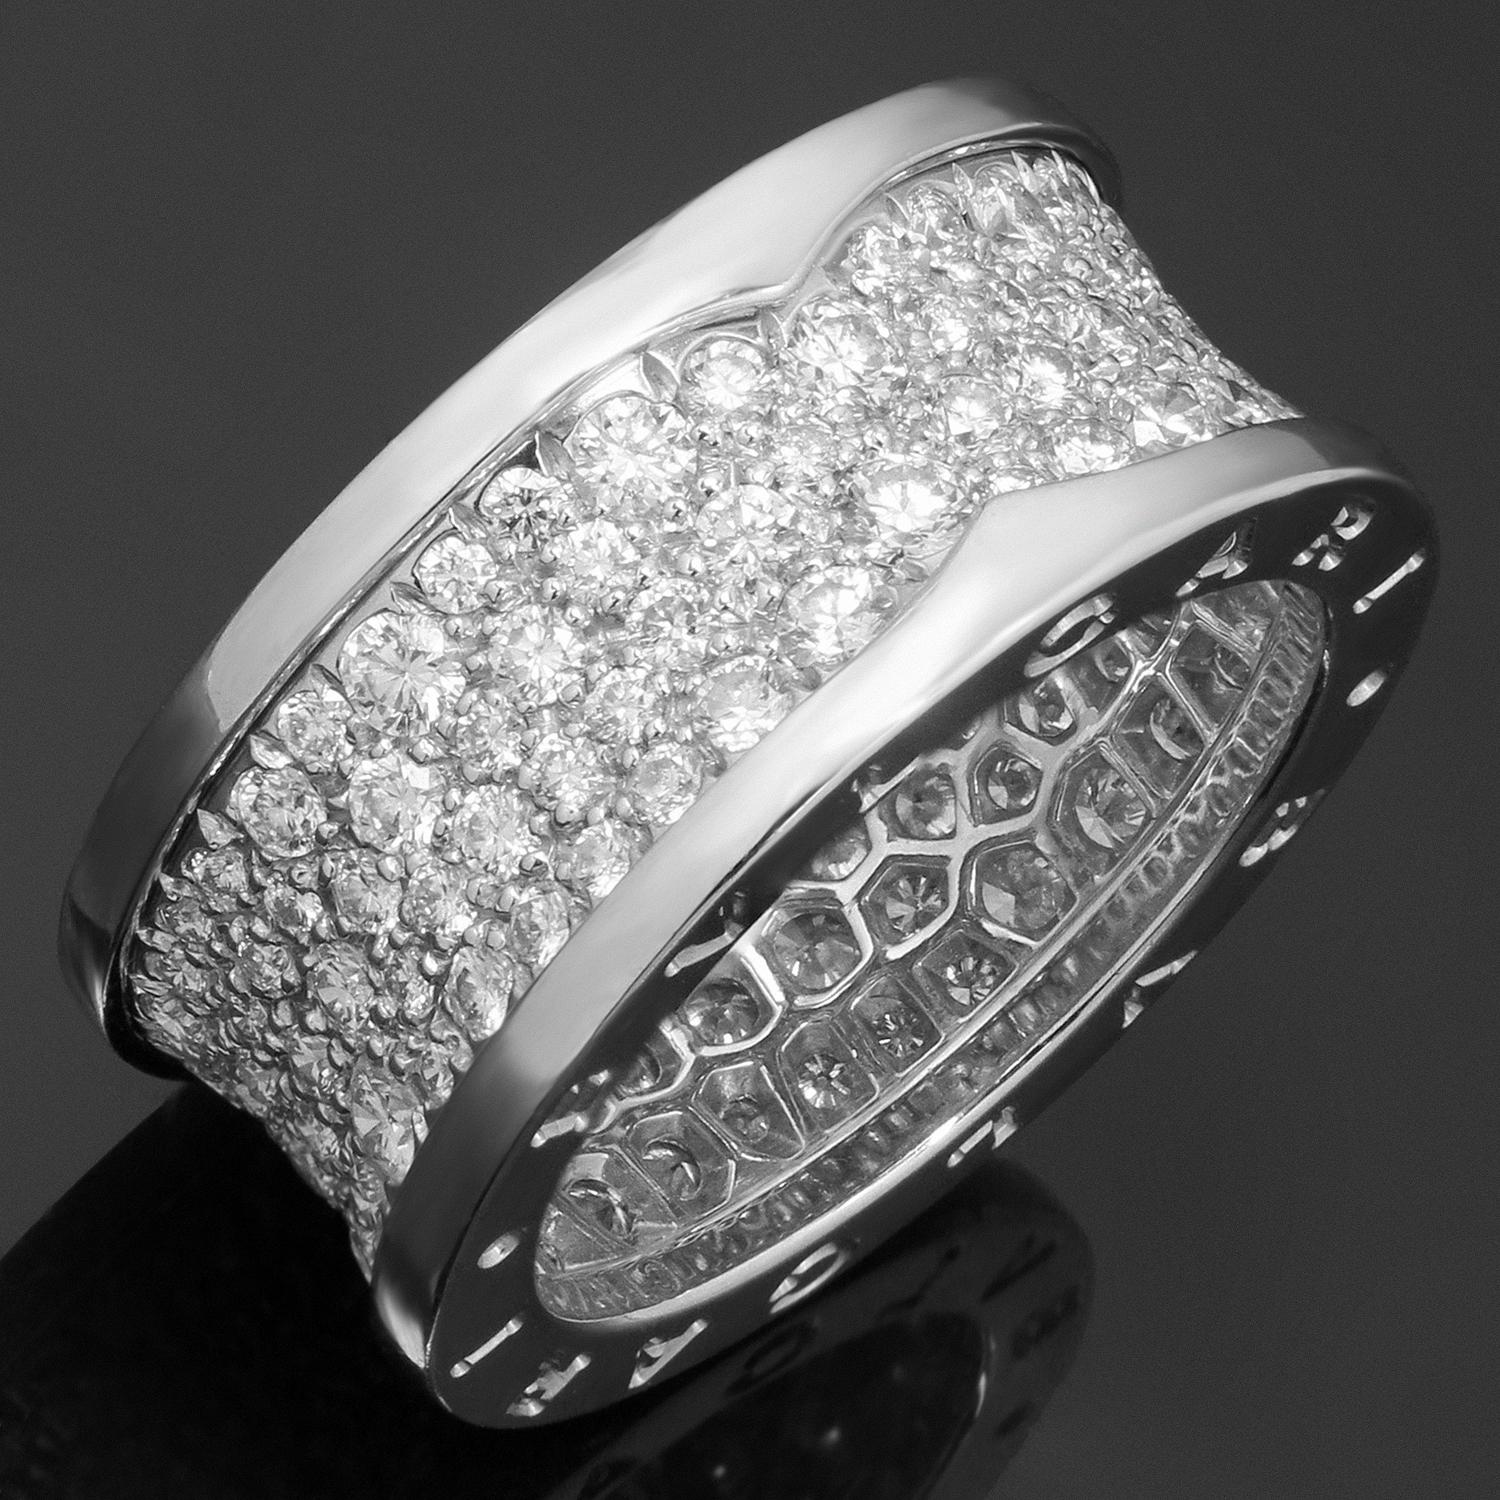 This fabulous ring from Bulgari's iconic B.zero1 collection features a single band design crafted in 18k white gold, engraved with the Bvlgari logo on both sides and pave-set with sparkling brilliant-cut round D-F VVS2-VS1 diamonds of an estimated